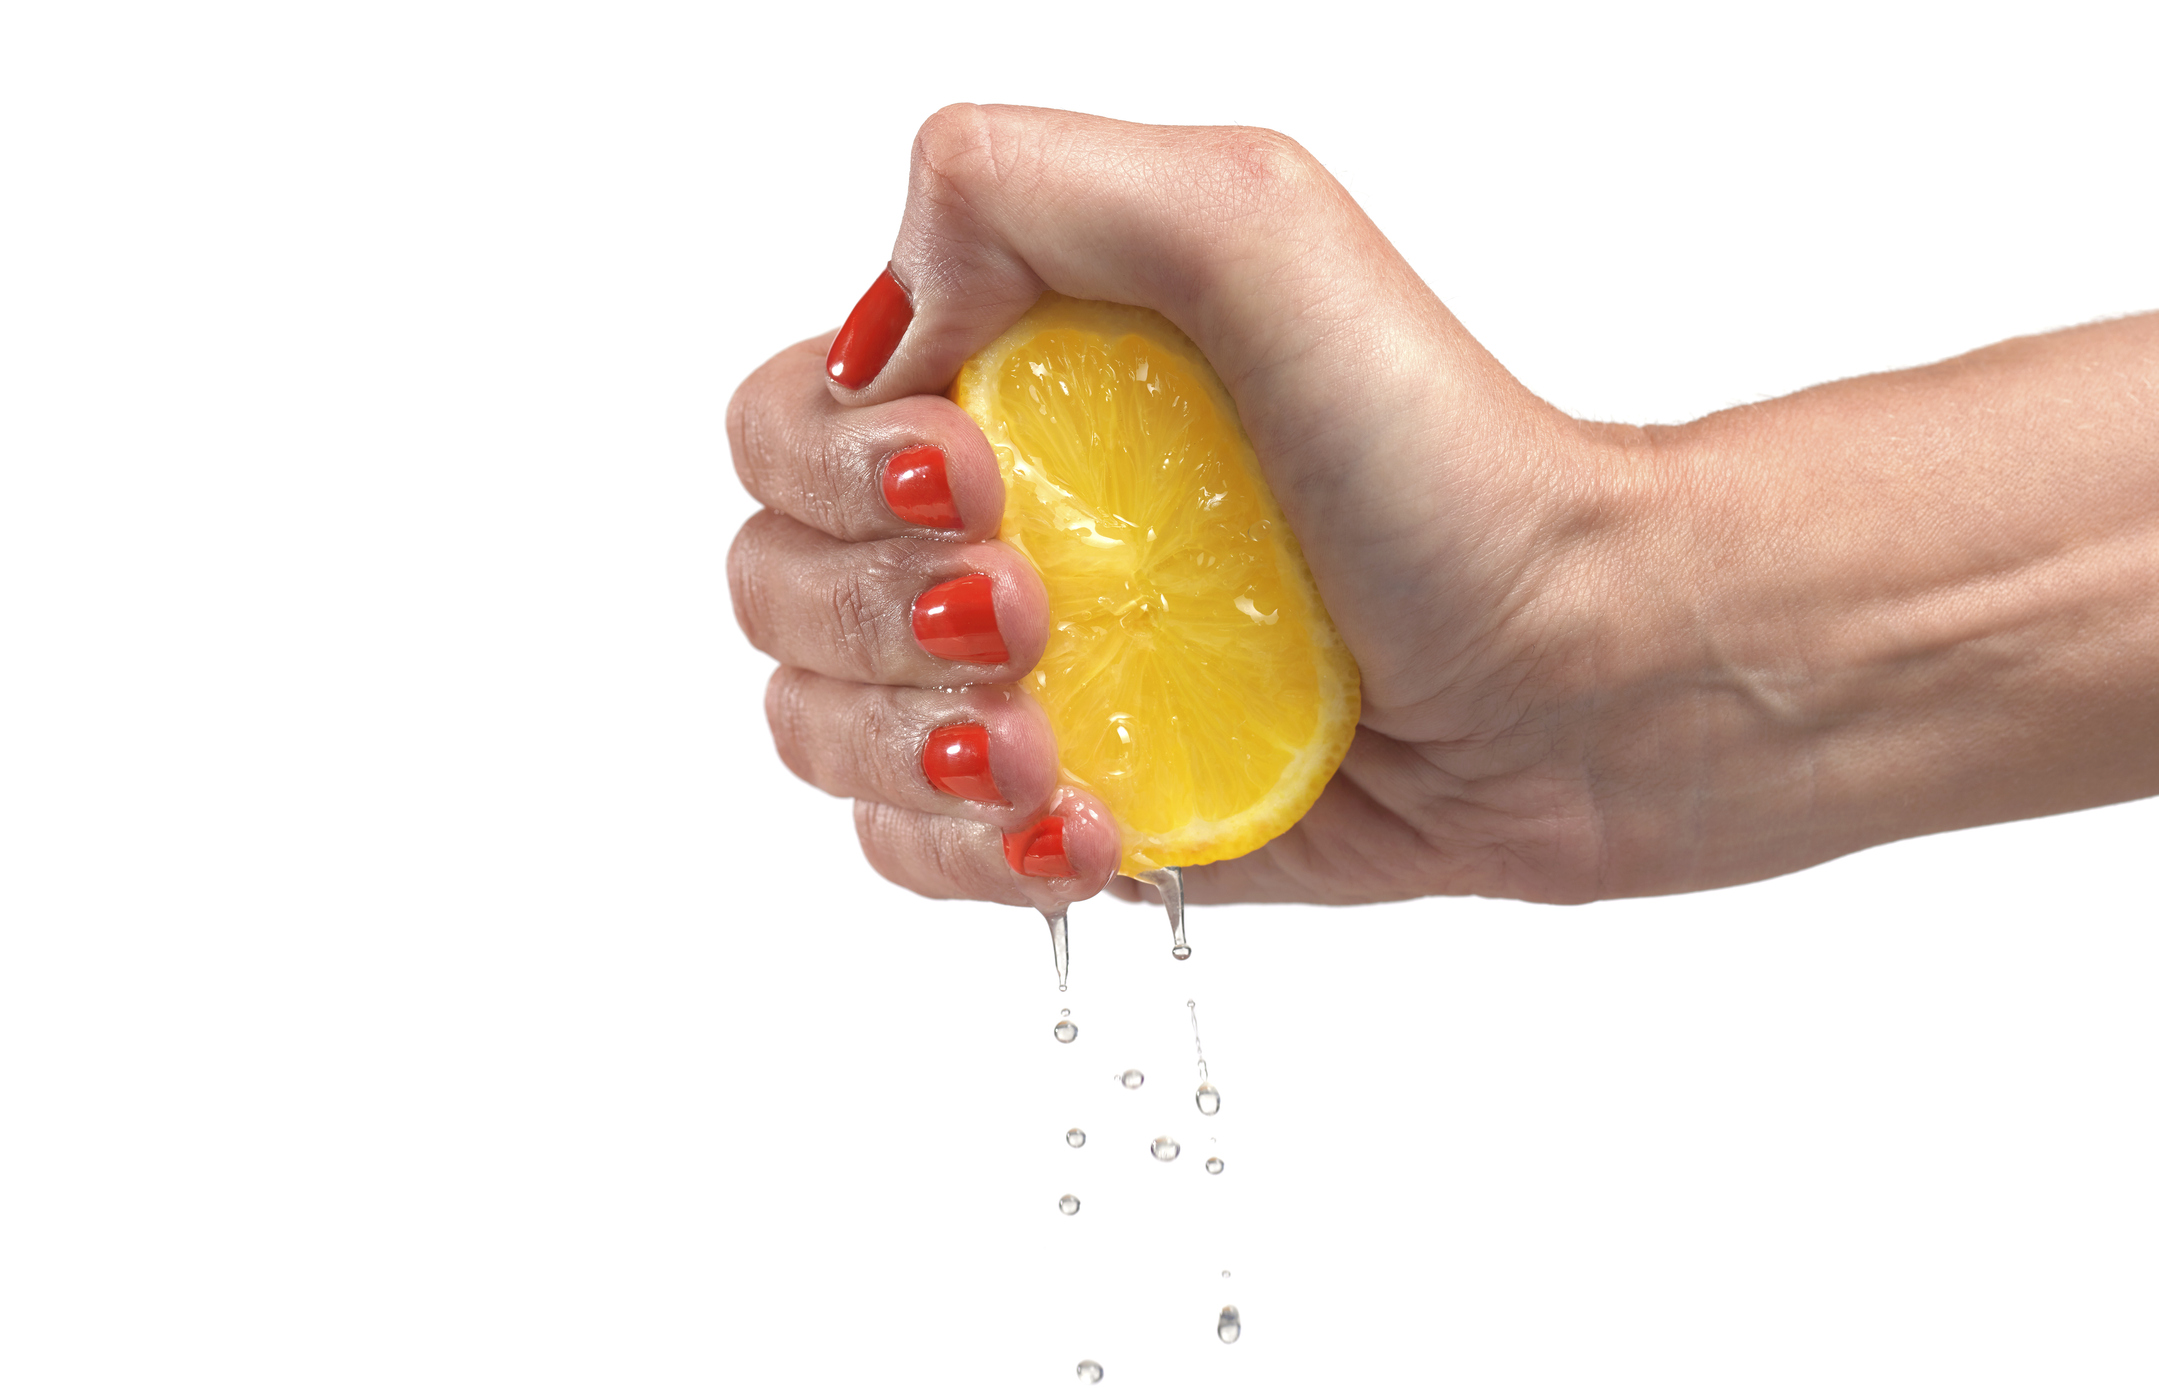 woman wearing red nail varnish squeezing lemon with her hand and drops of lemon juice are falling down